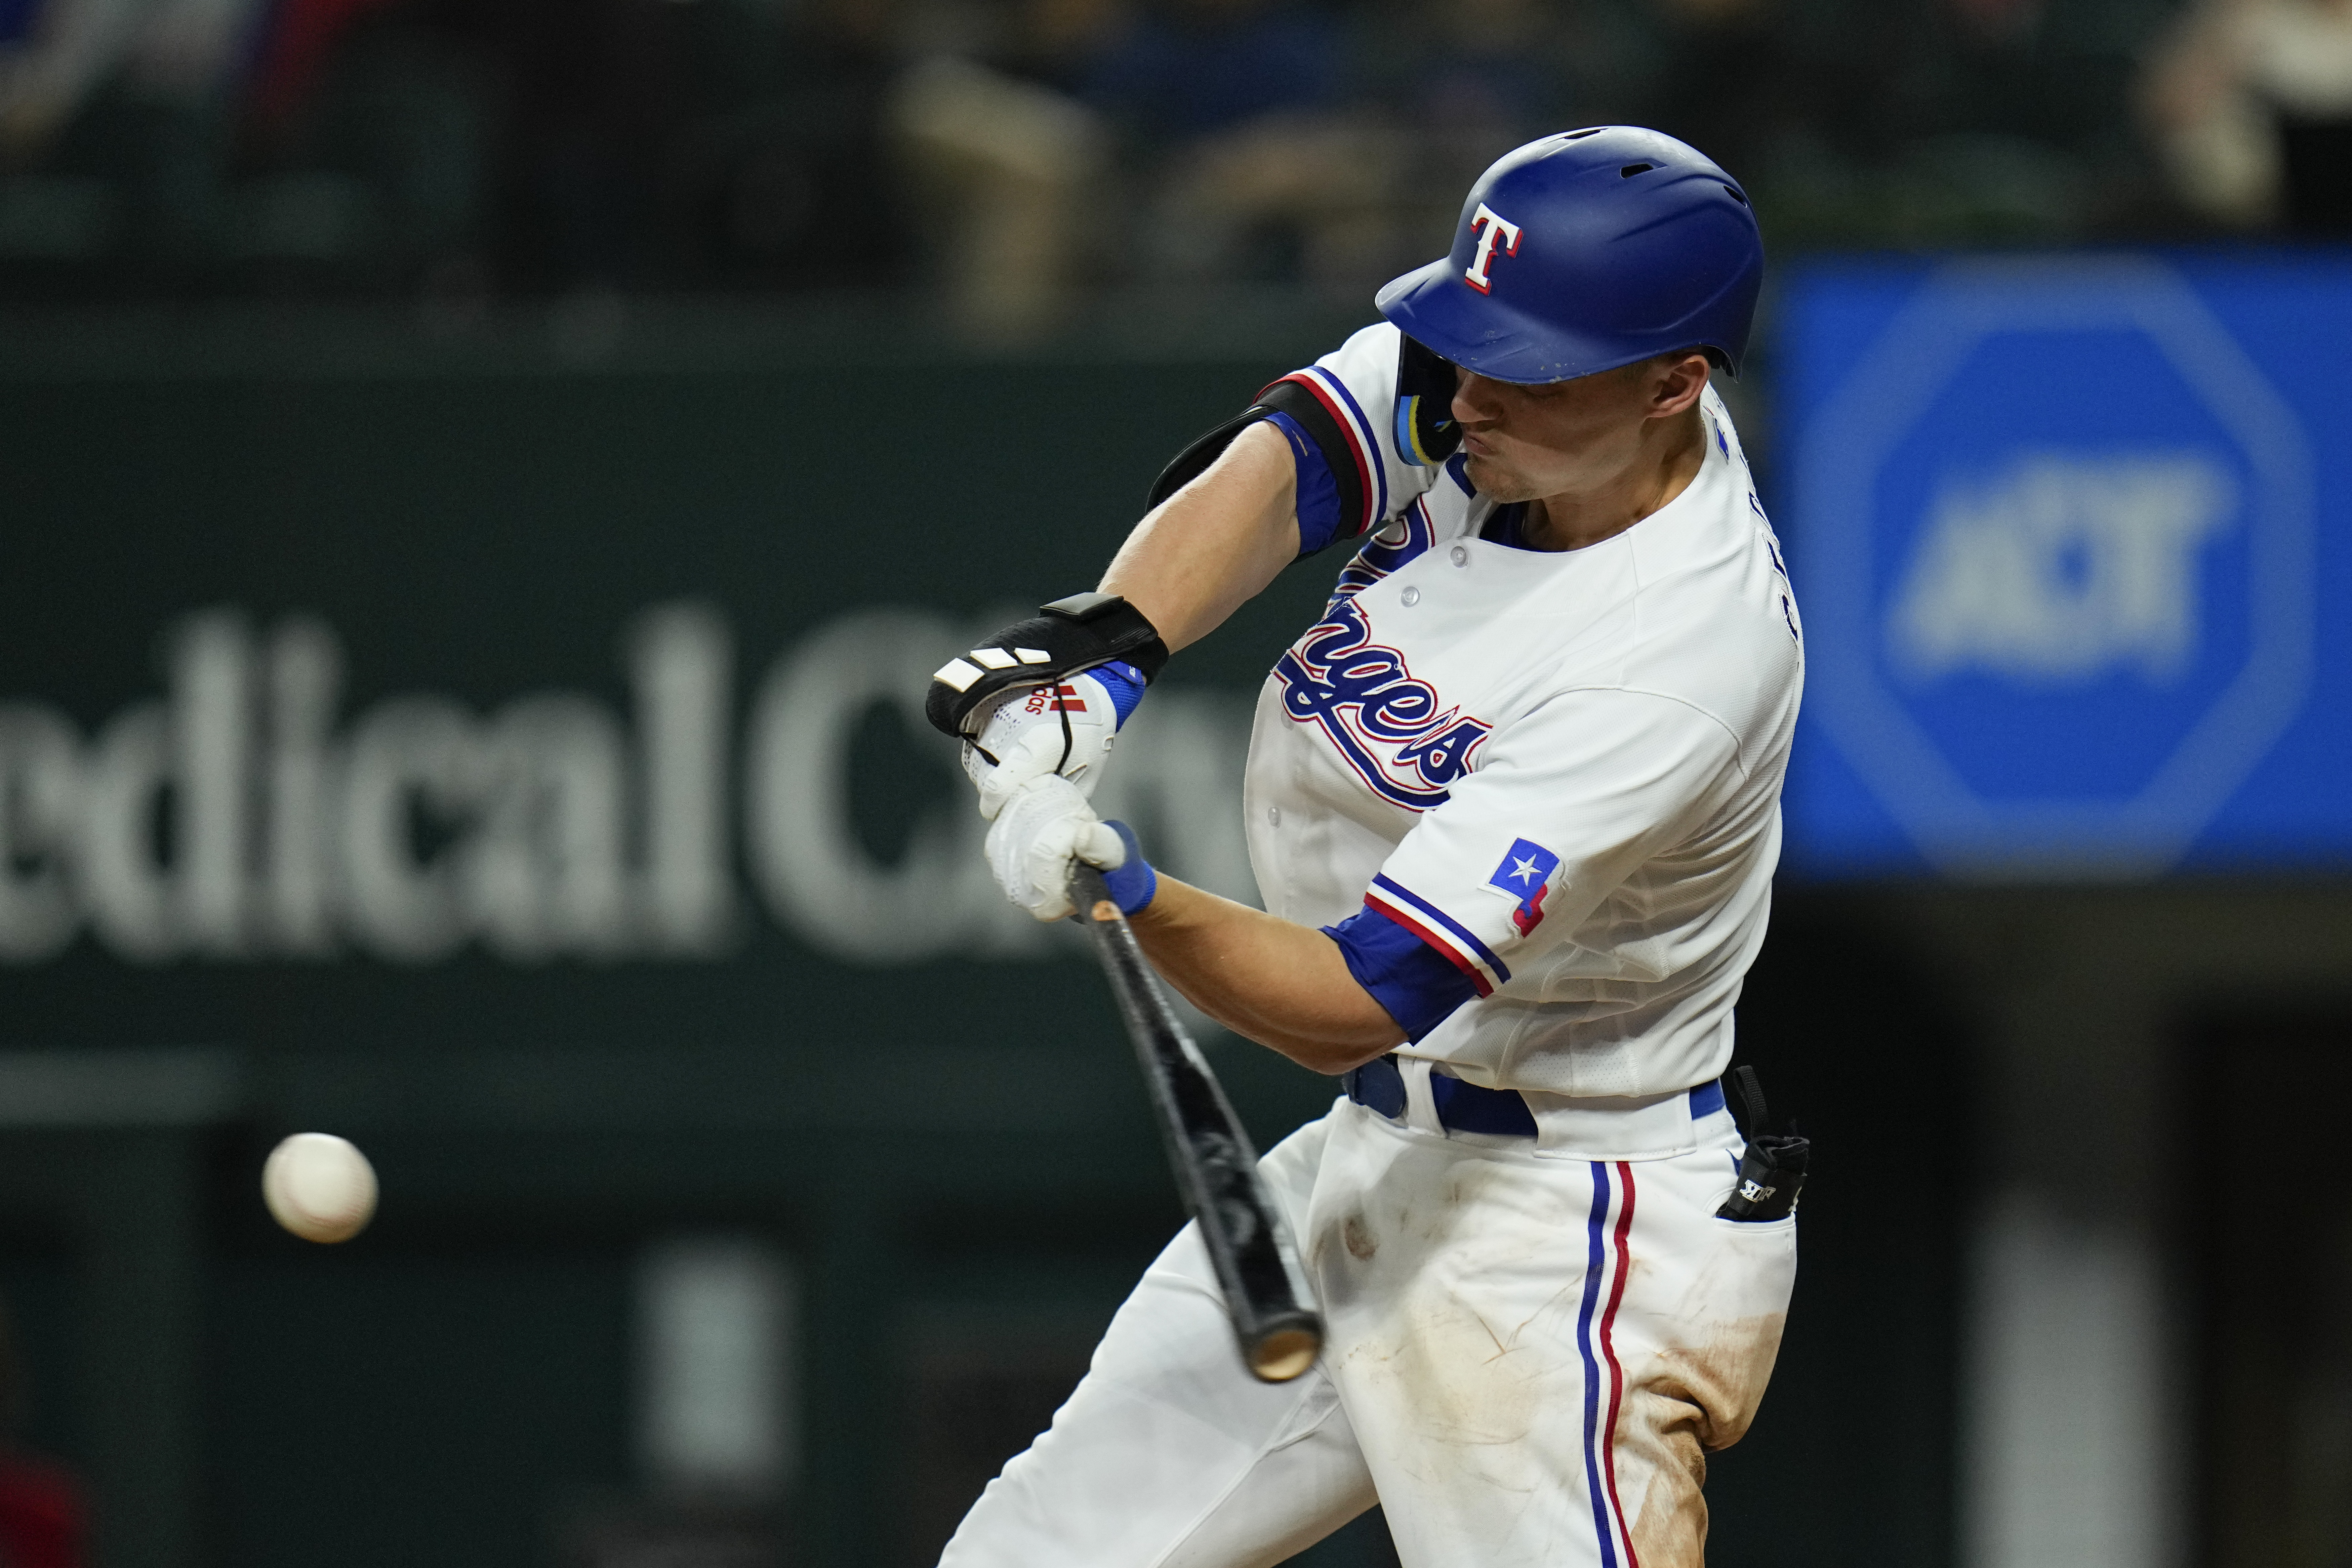 Without Corey Seager, Rangers seek second straight win over Astros